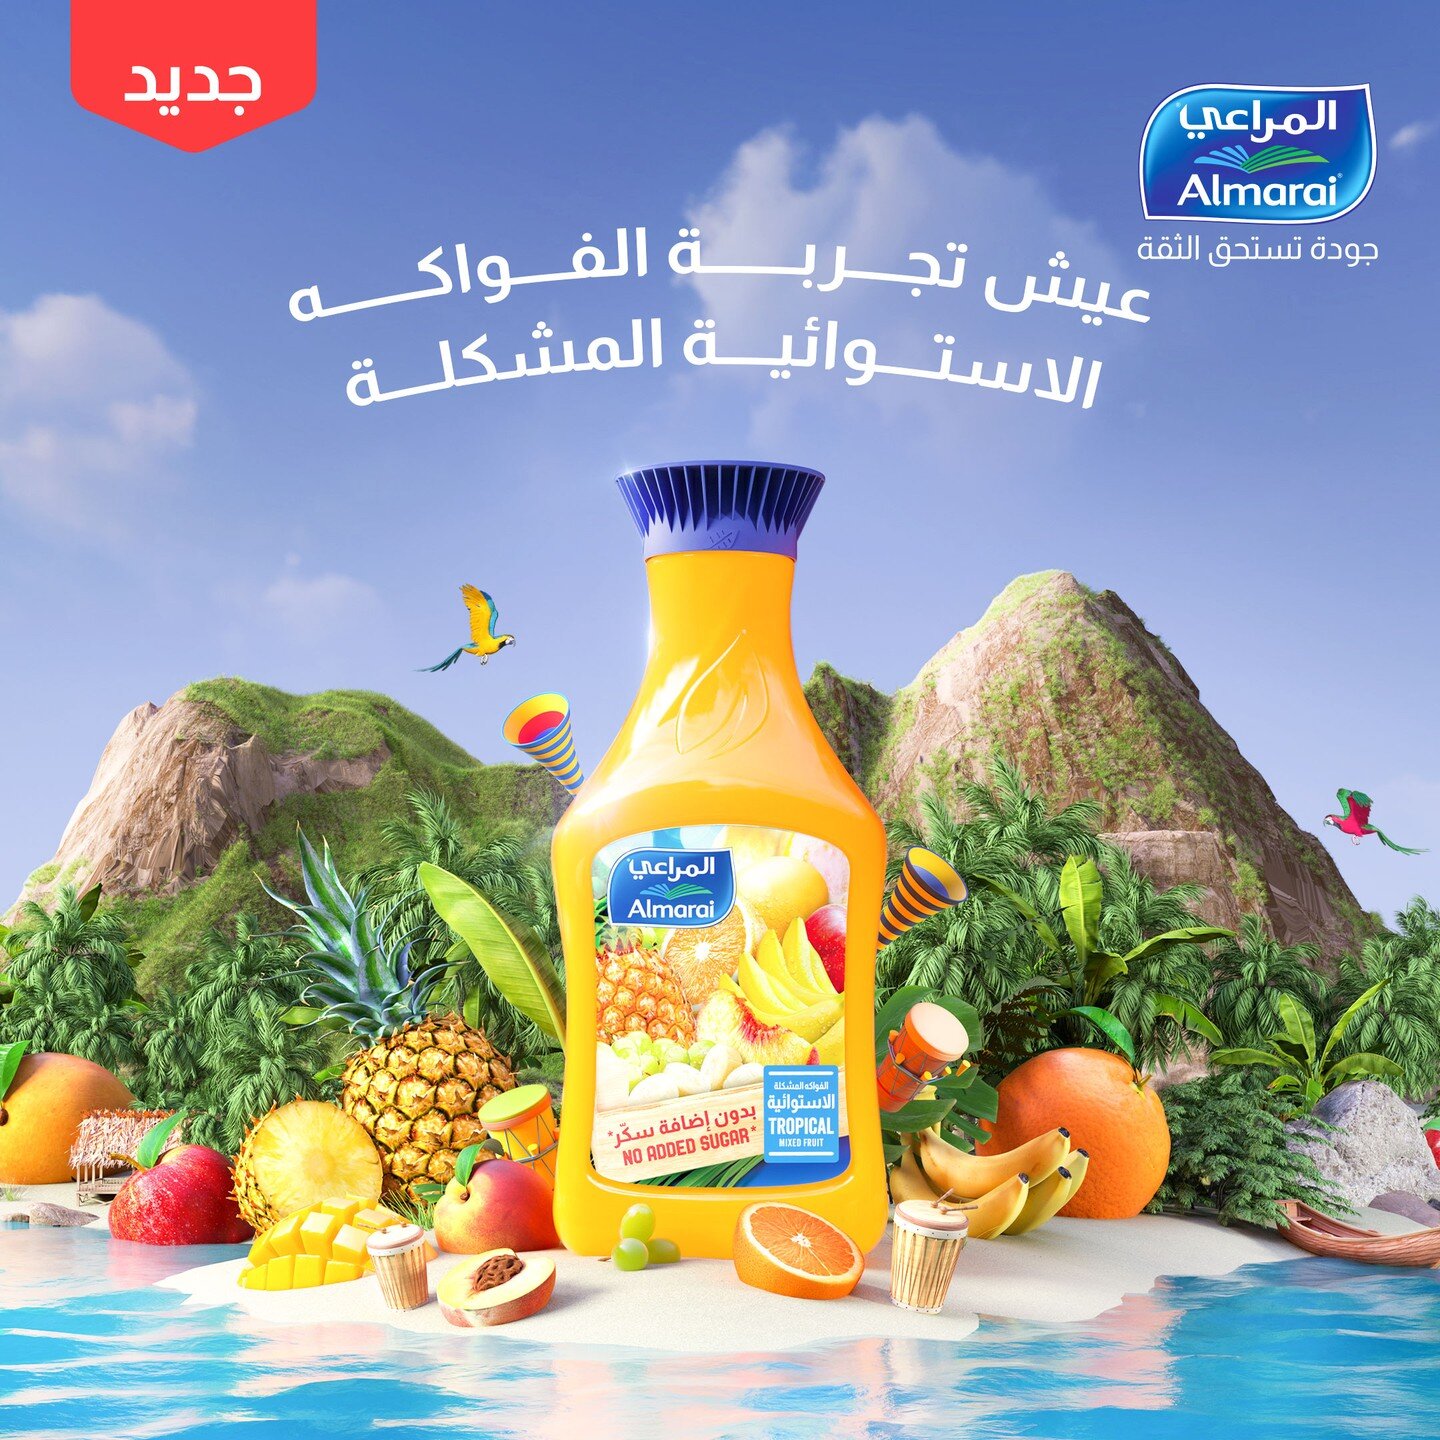 We are proud to share with you a project where our team did a great job for almarai tropical juice, a full CGI Campaign &amp; TV Commercial,

www.grid-studio.net

#gridstudio #campaign #tv #ad #advertising #saudiarabia #uae #amman